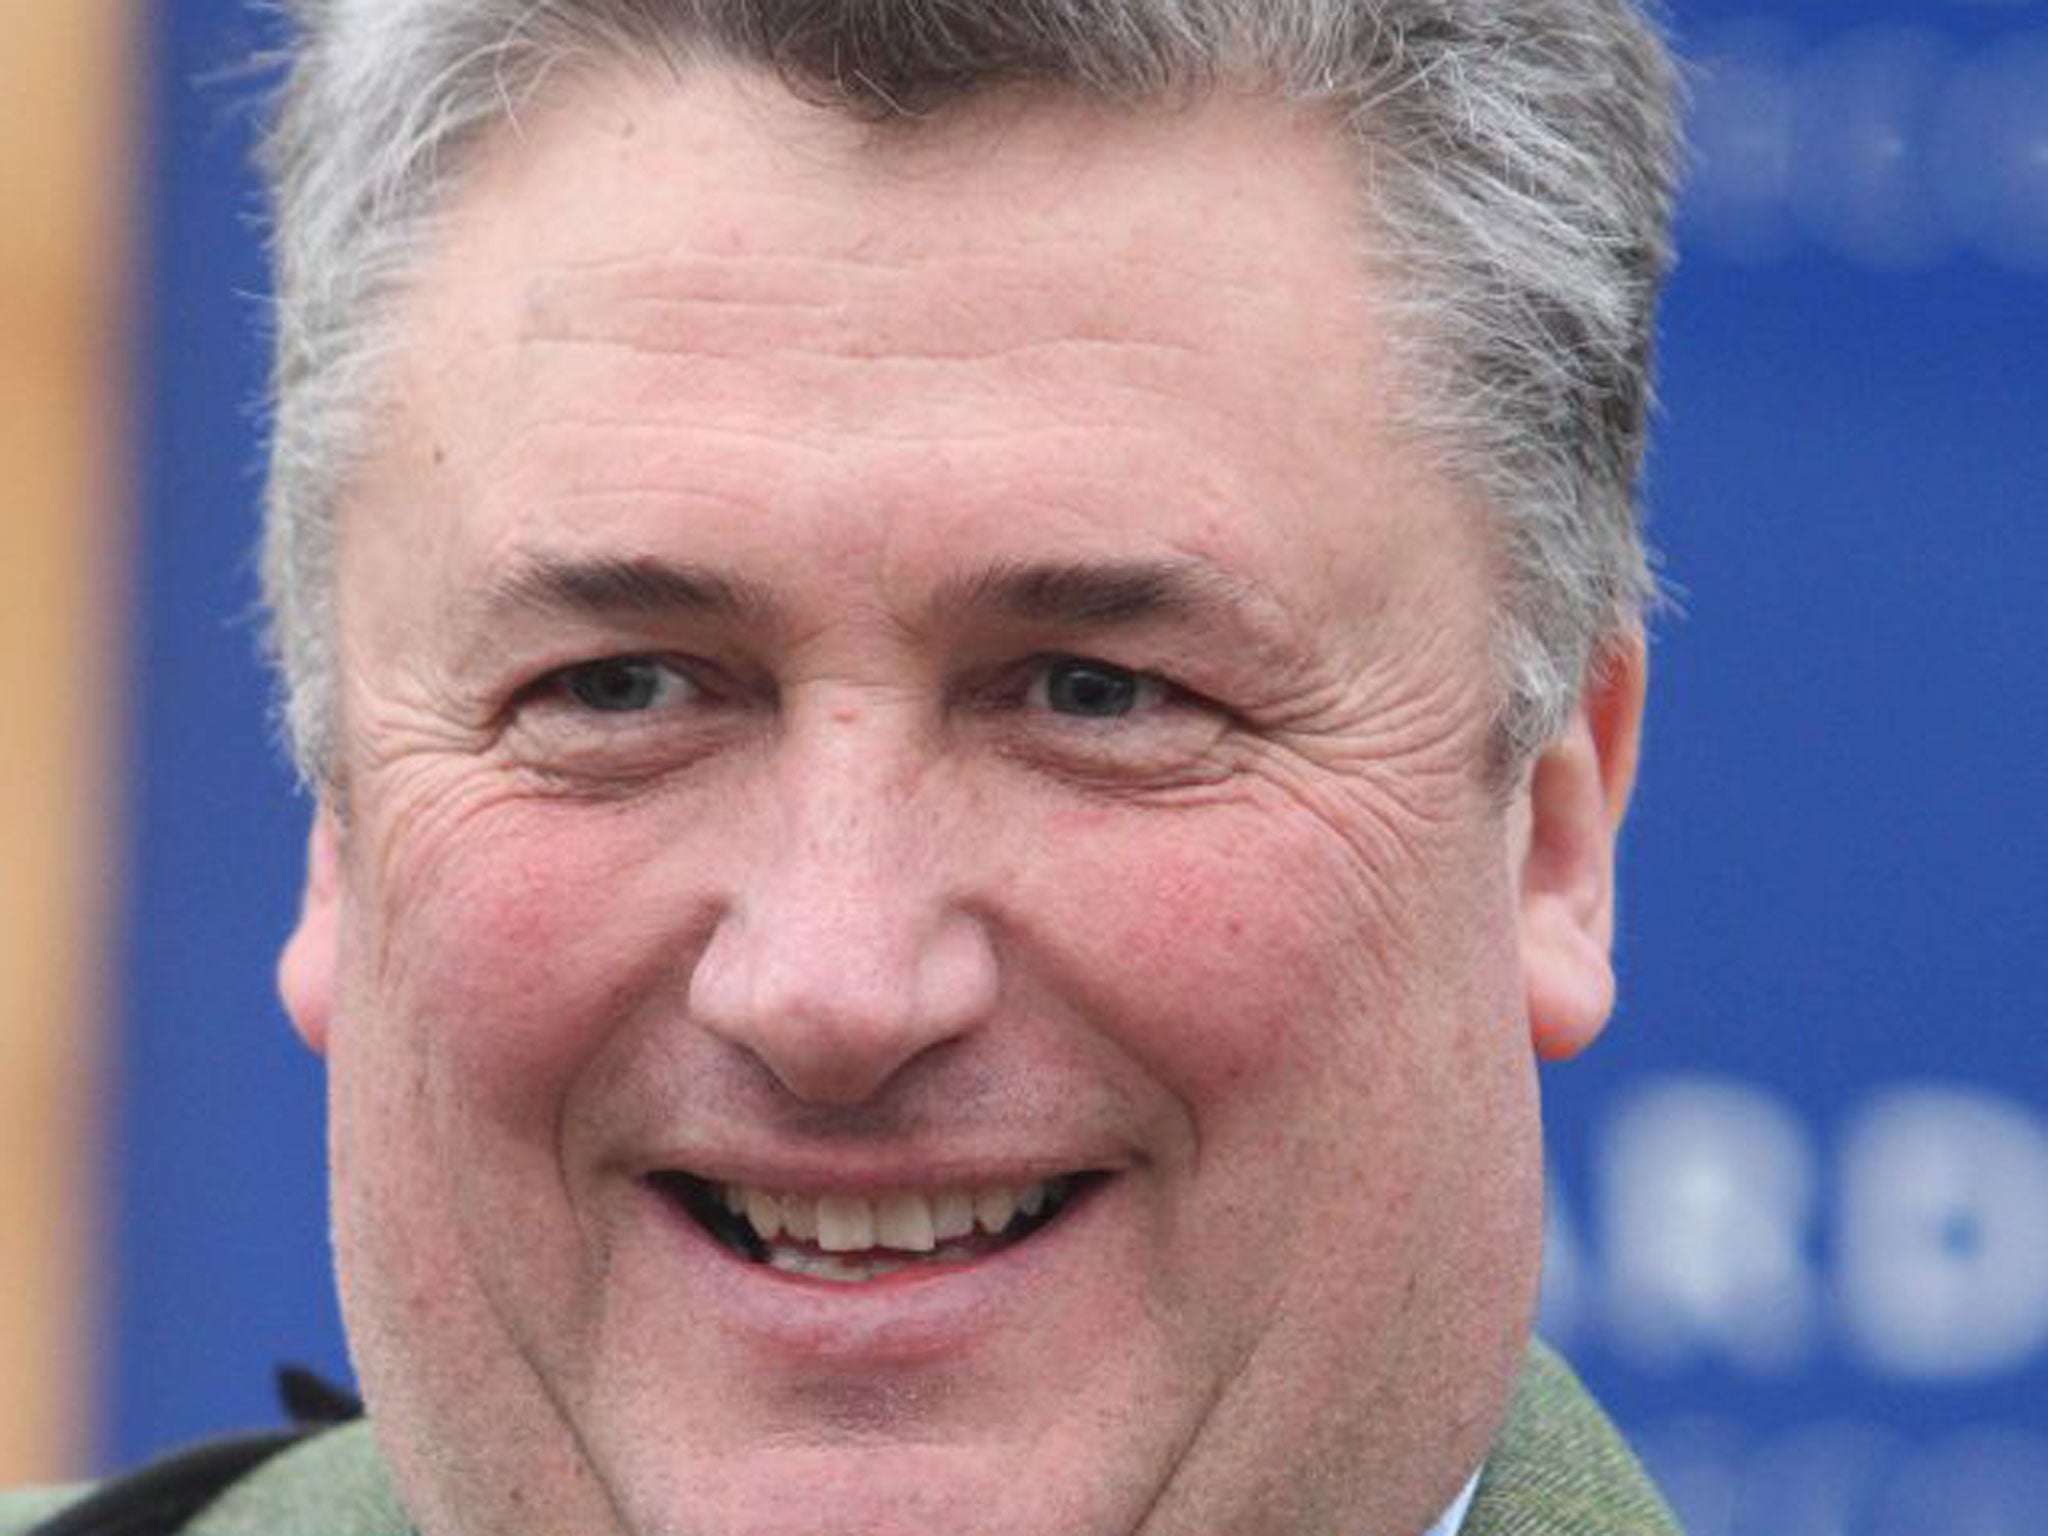 Paul Nicholls has revived Tidal Bay since taking charge of him